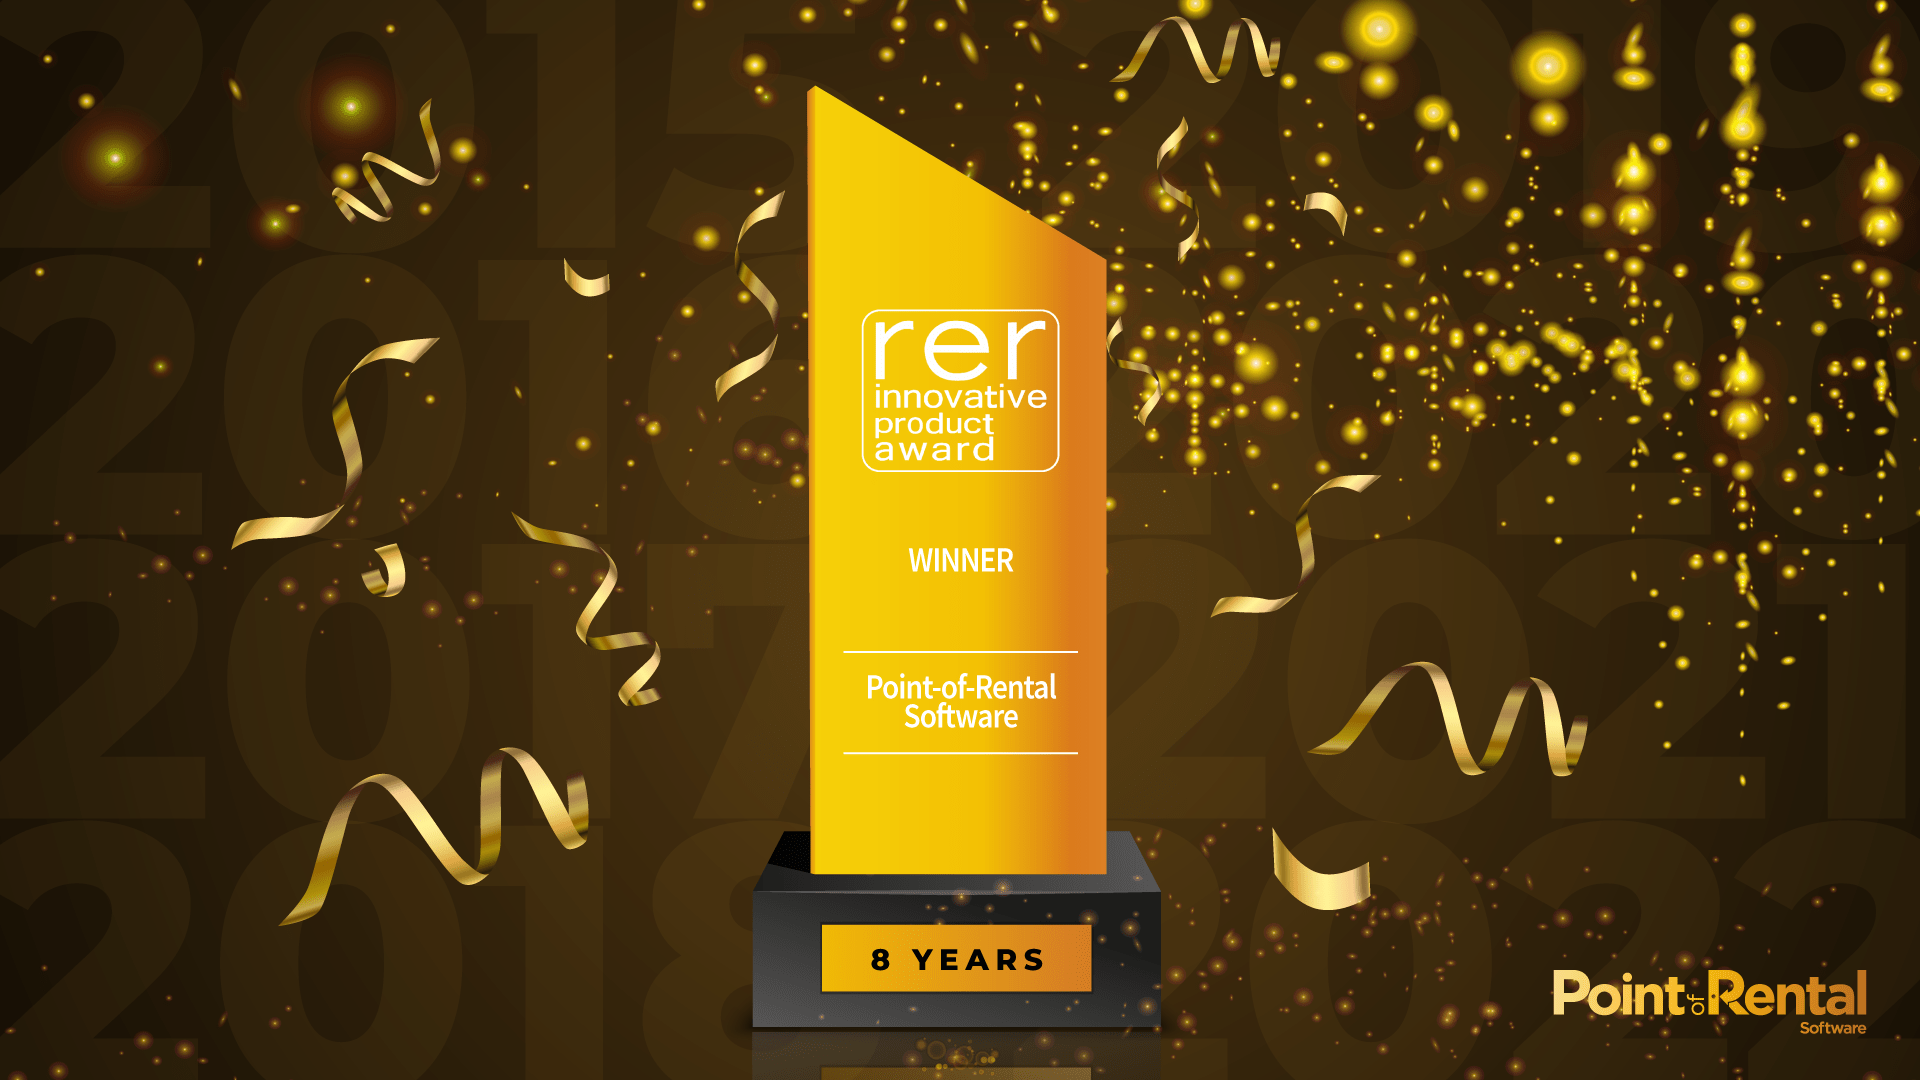 Essentials Enterprise won Point of Rental's 8th consecutive RER Innovative Product Award